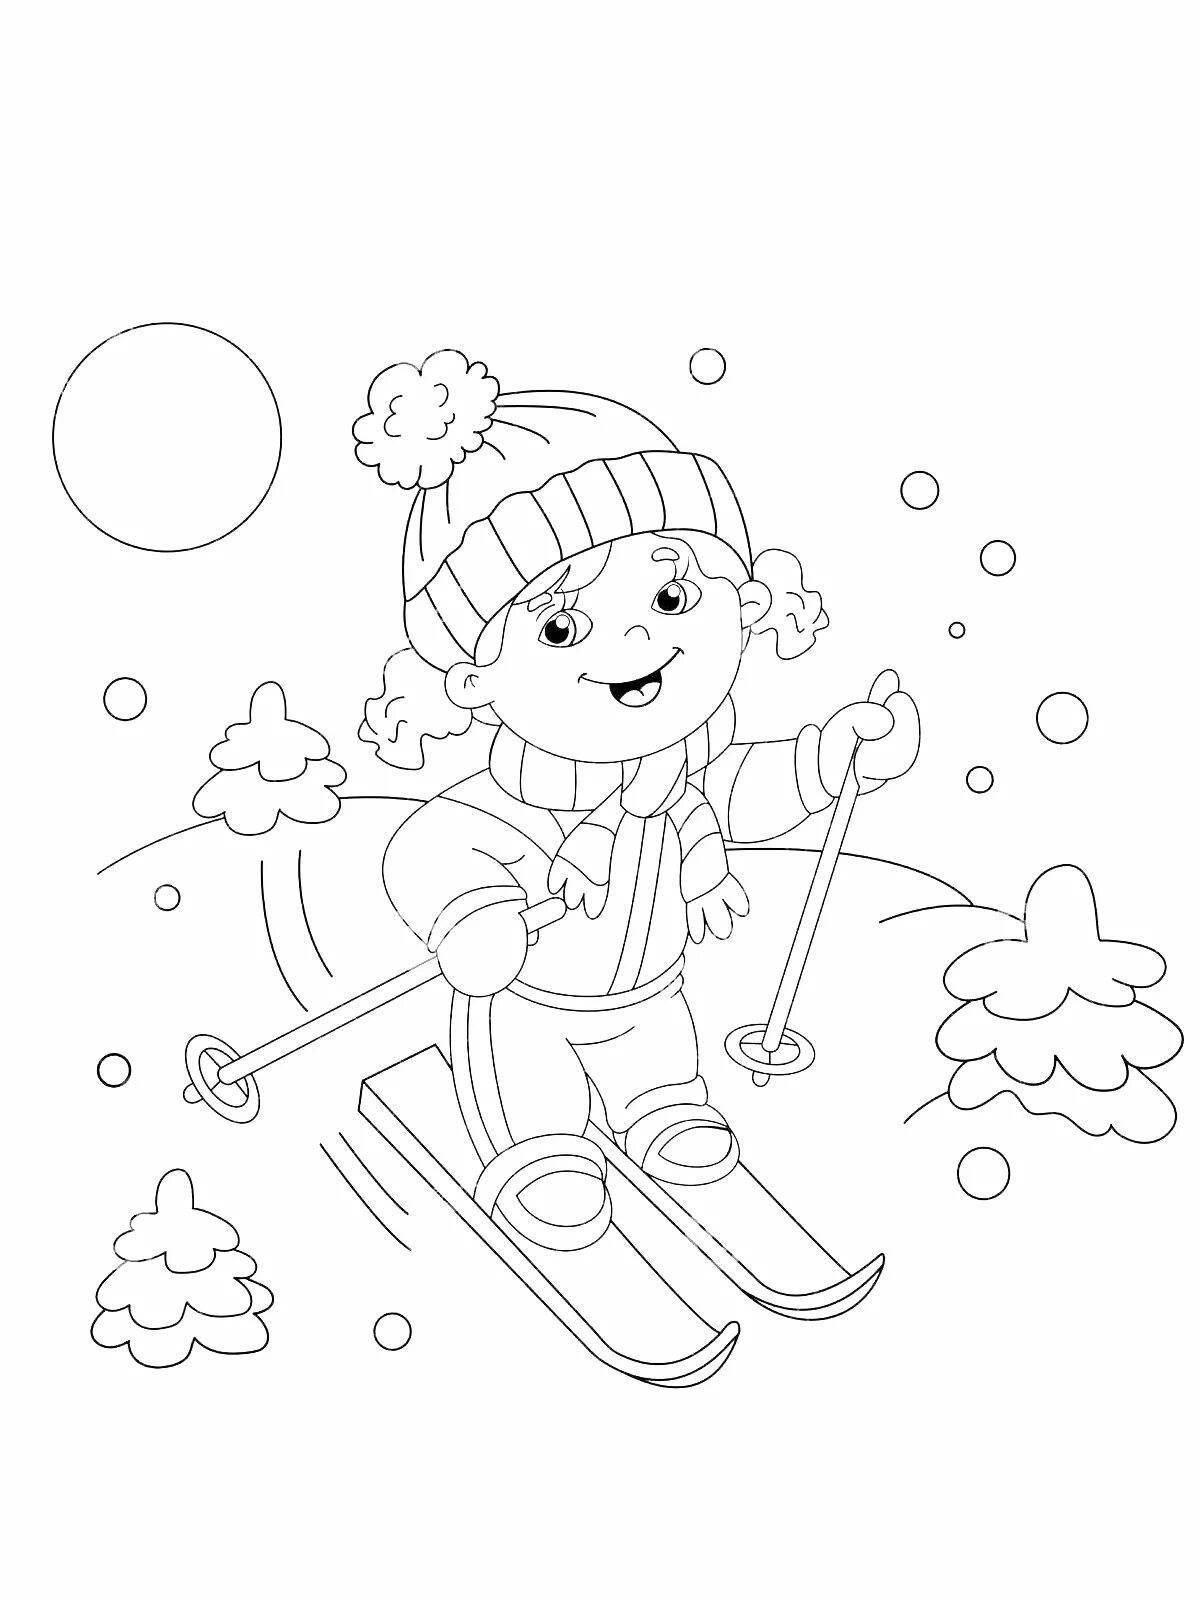 Live winter coloring